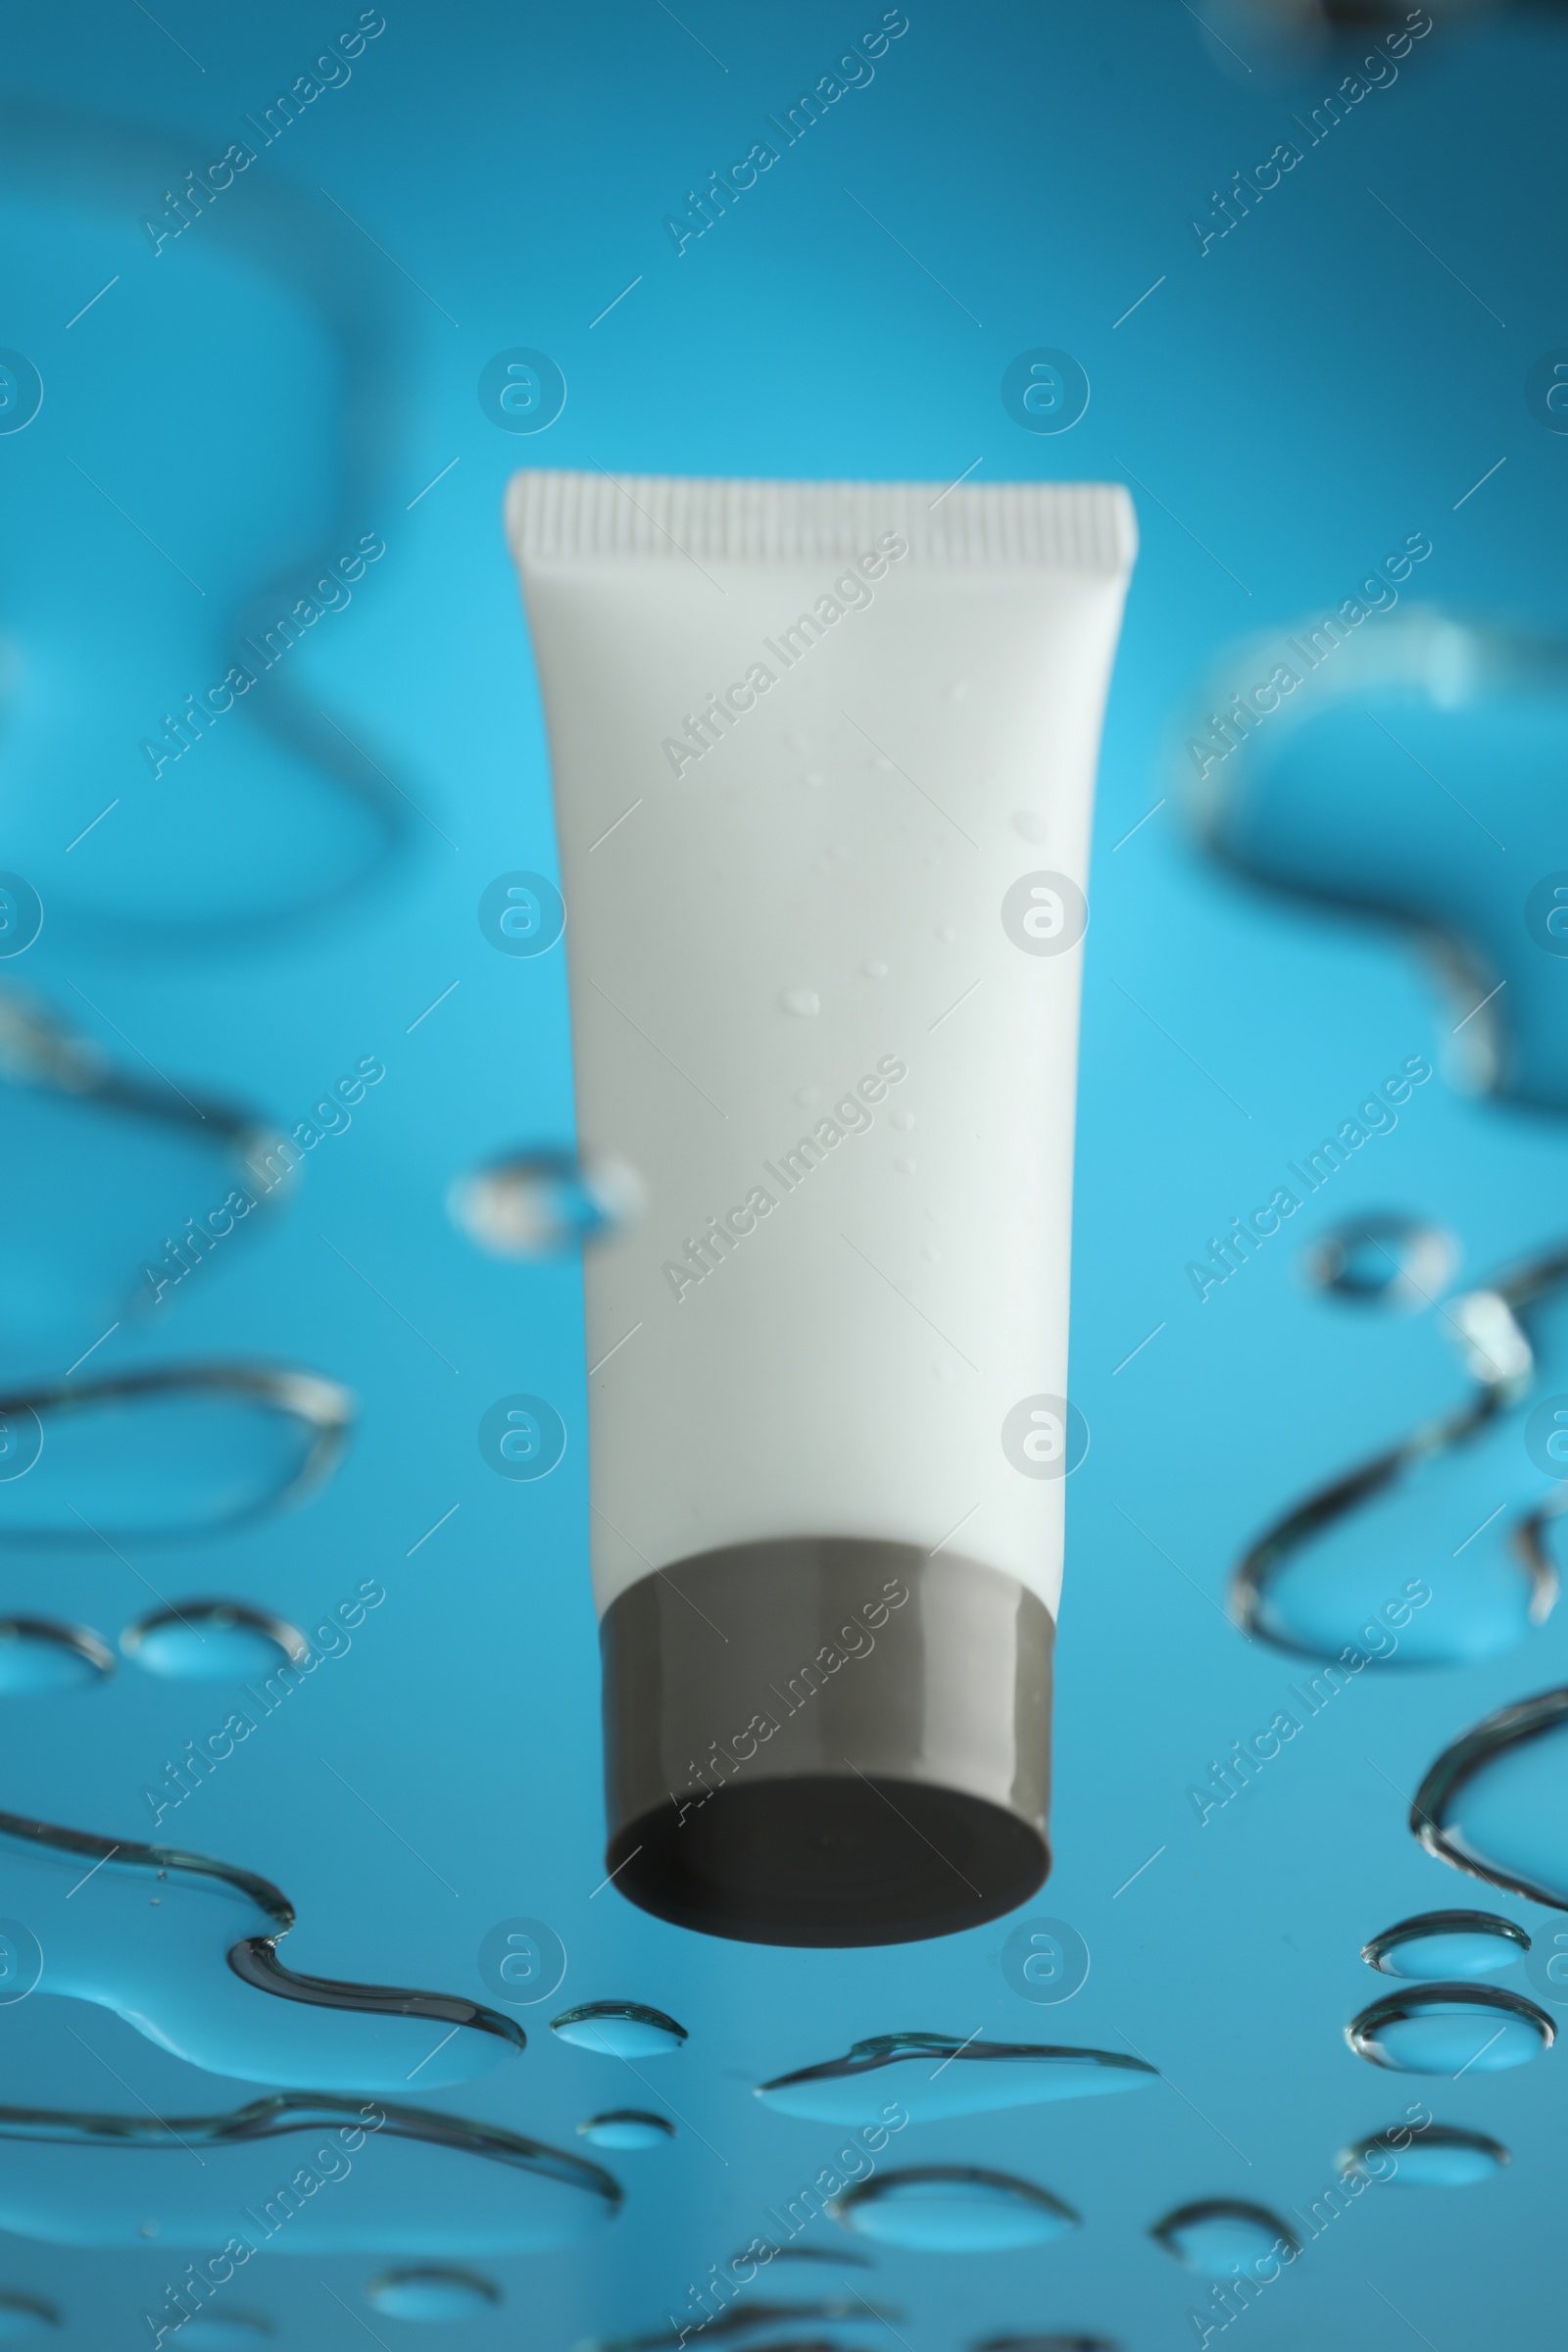 Photo of Moisturizing cream in tube on glass with water drops against blue background, low angle view